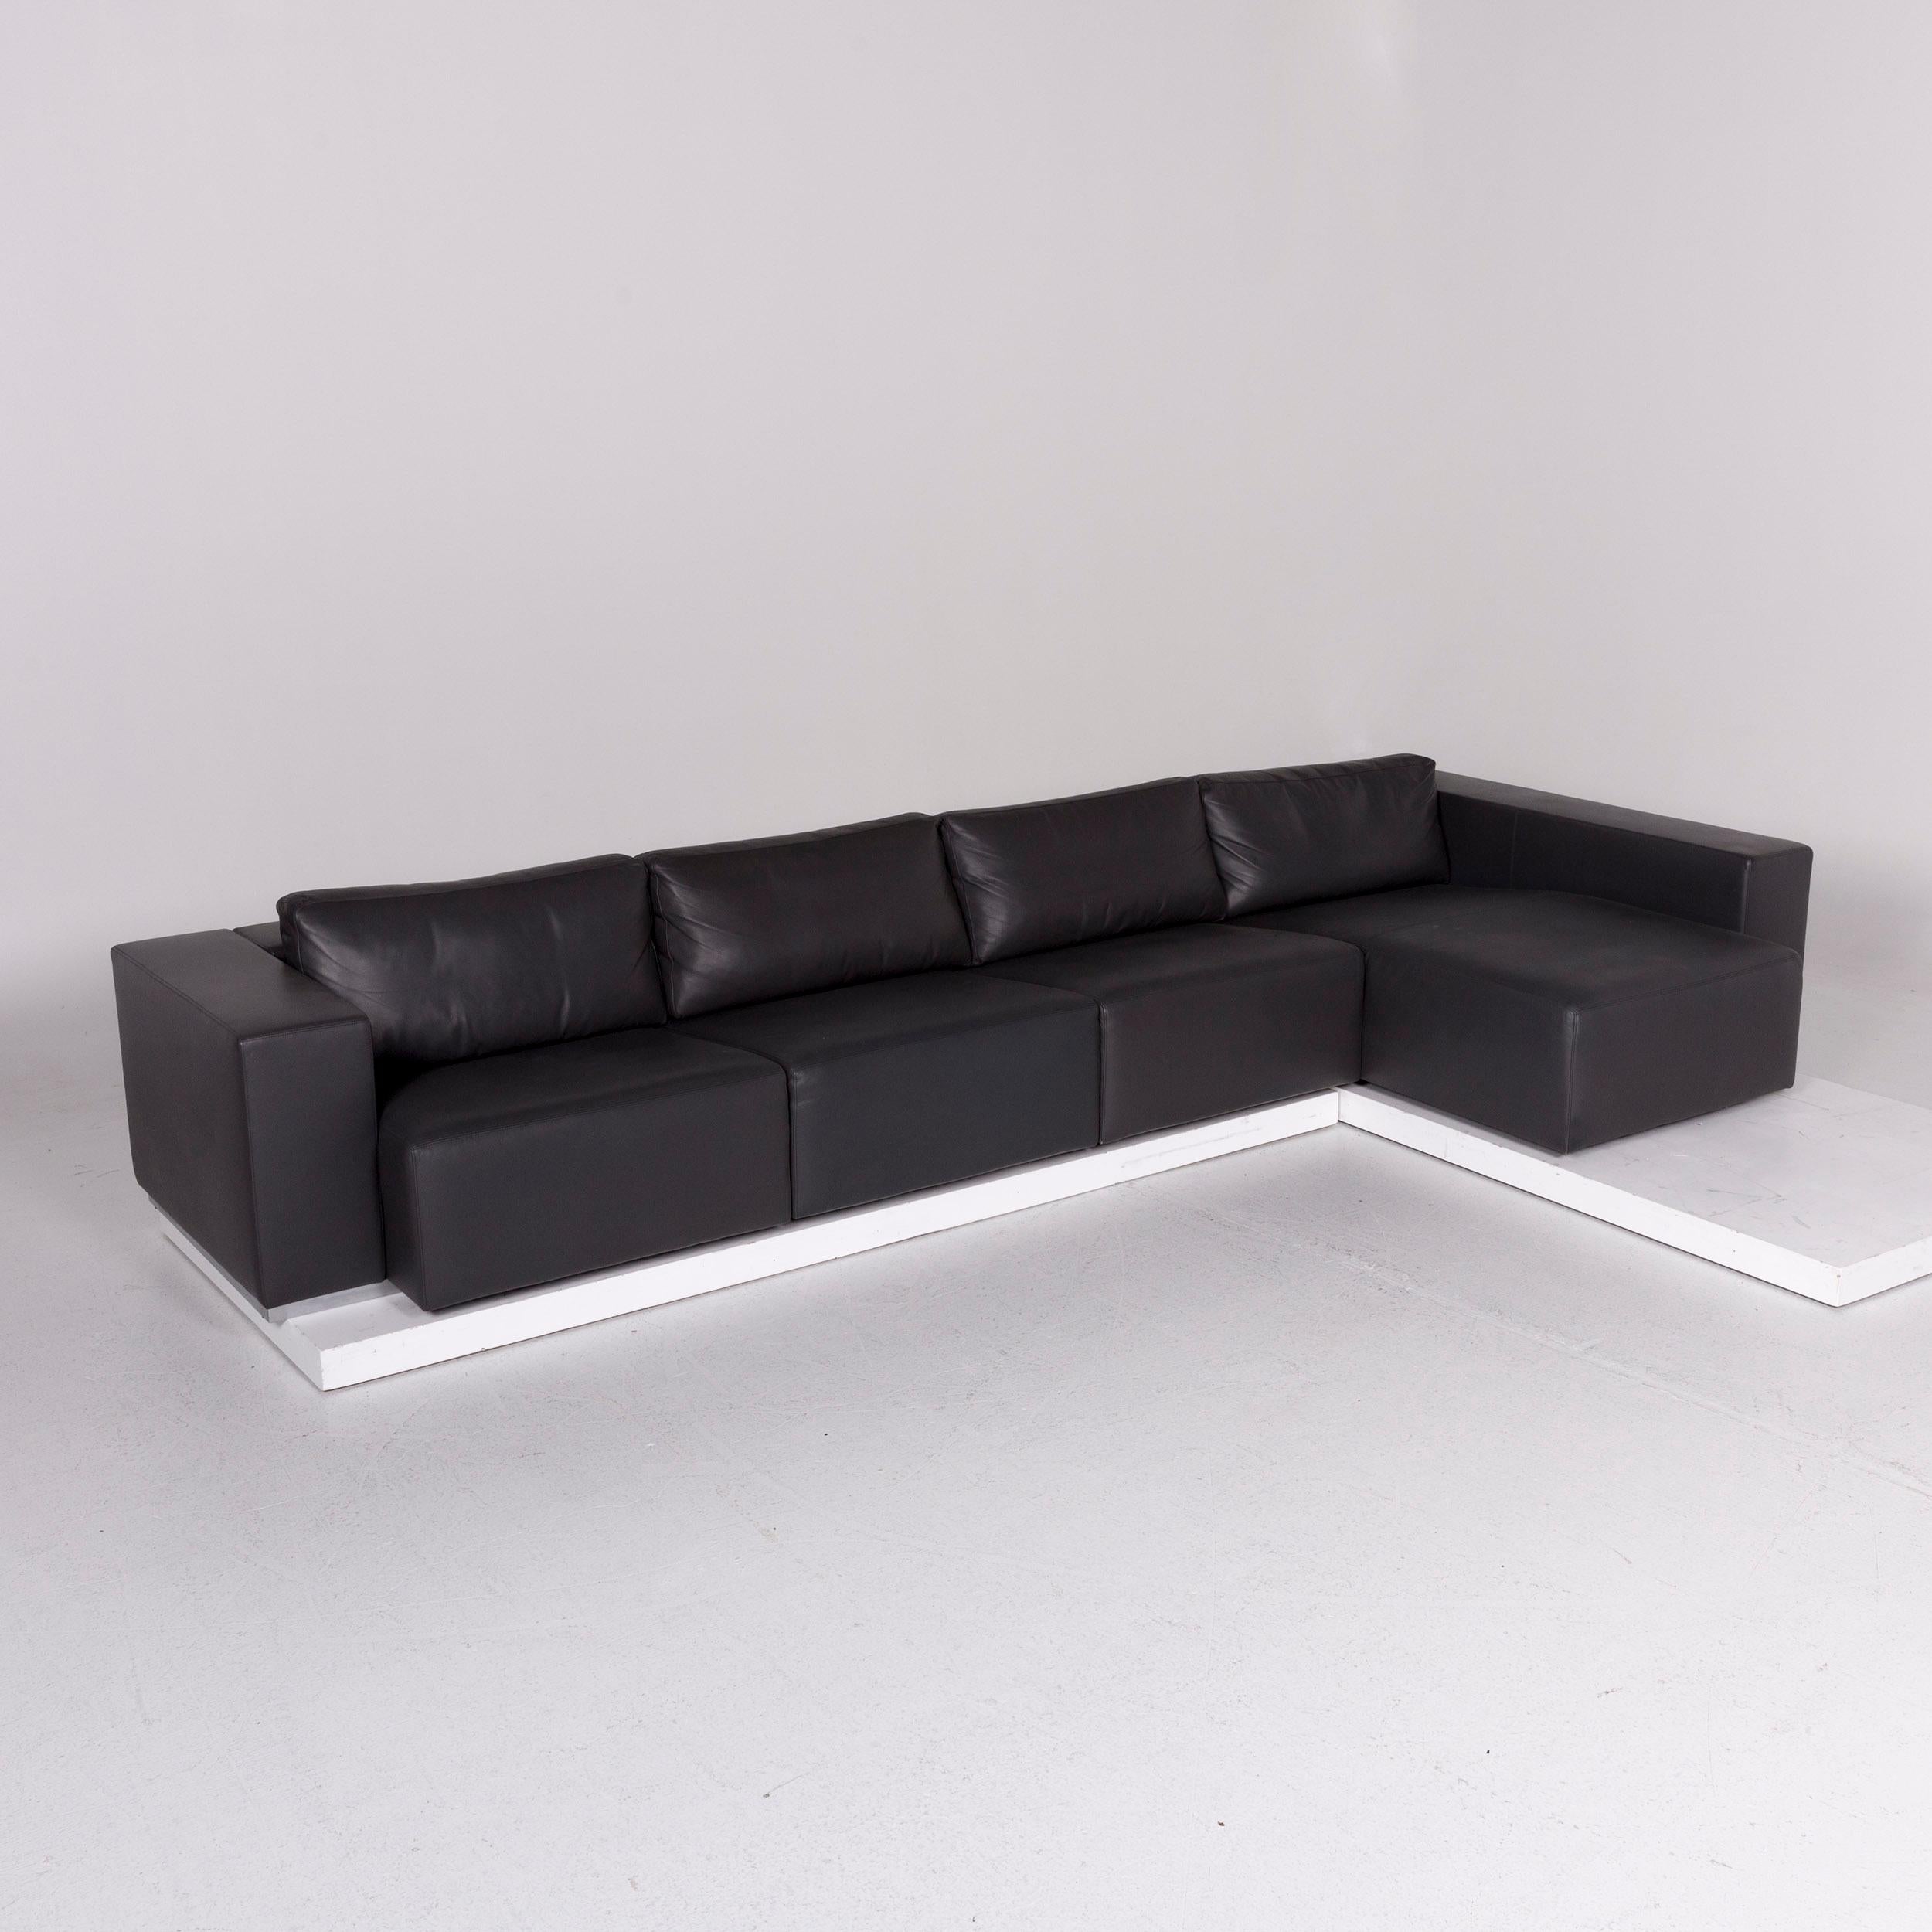 We bring to you a Walter Knoll Nelson leather sofa set gray 1 corner sofa 1 stool couch.

 Product measurements in centimeters:
 
Depth 103
Width 360
Height 58
Seat-height 40
Rest-height 57
Seat-depth 63
Seat-width 311
Back-height 31.
  